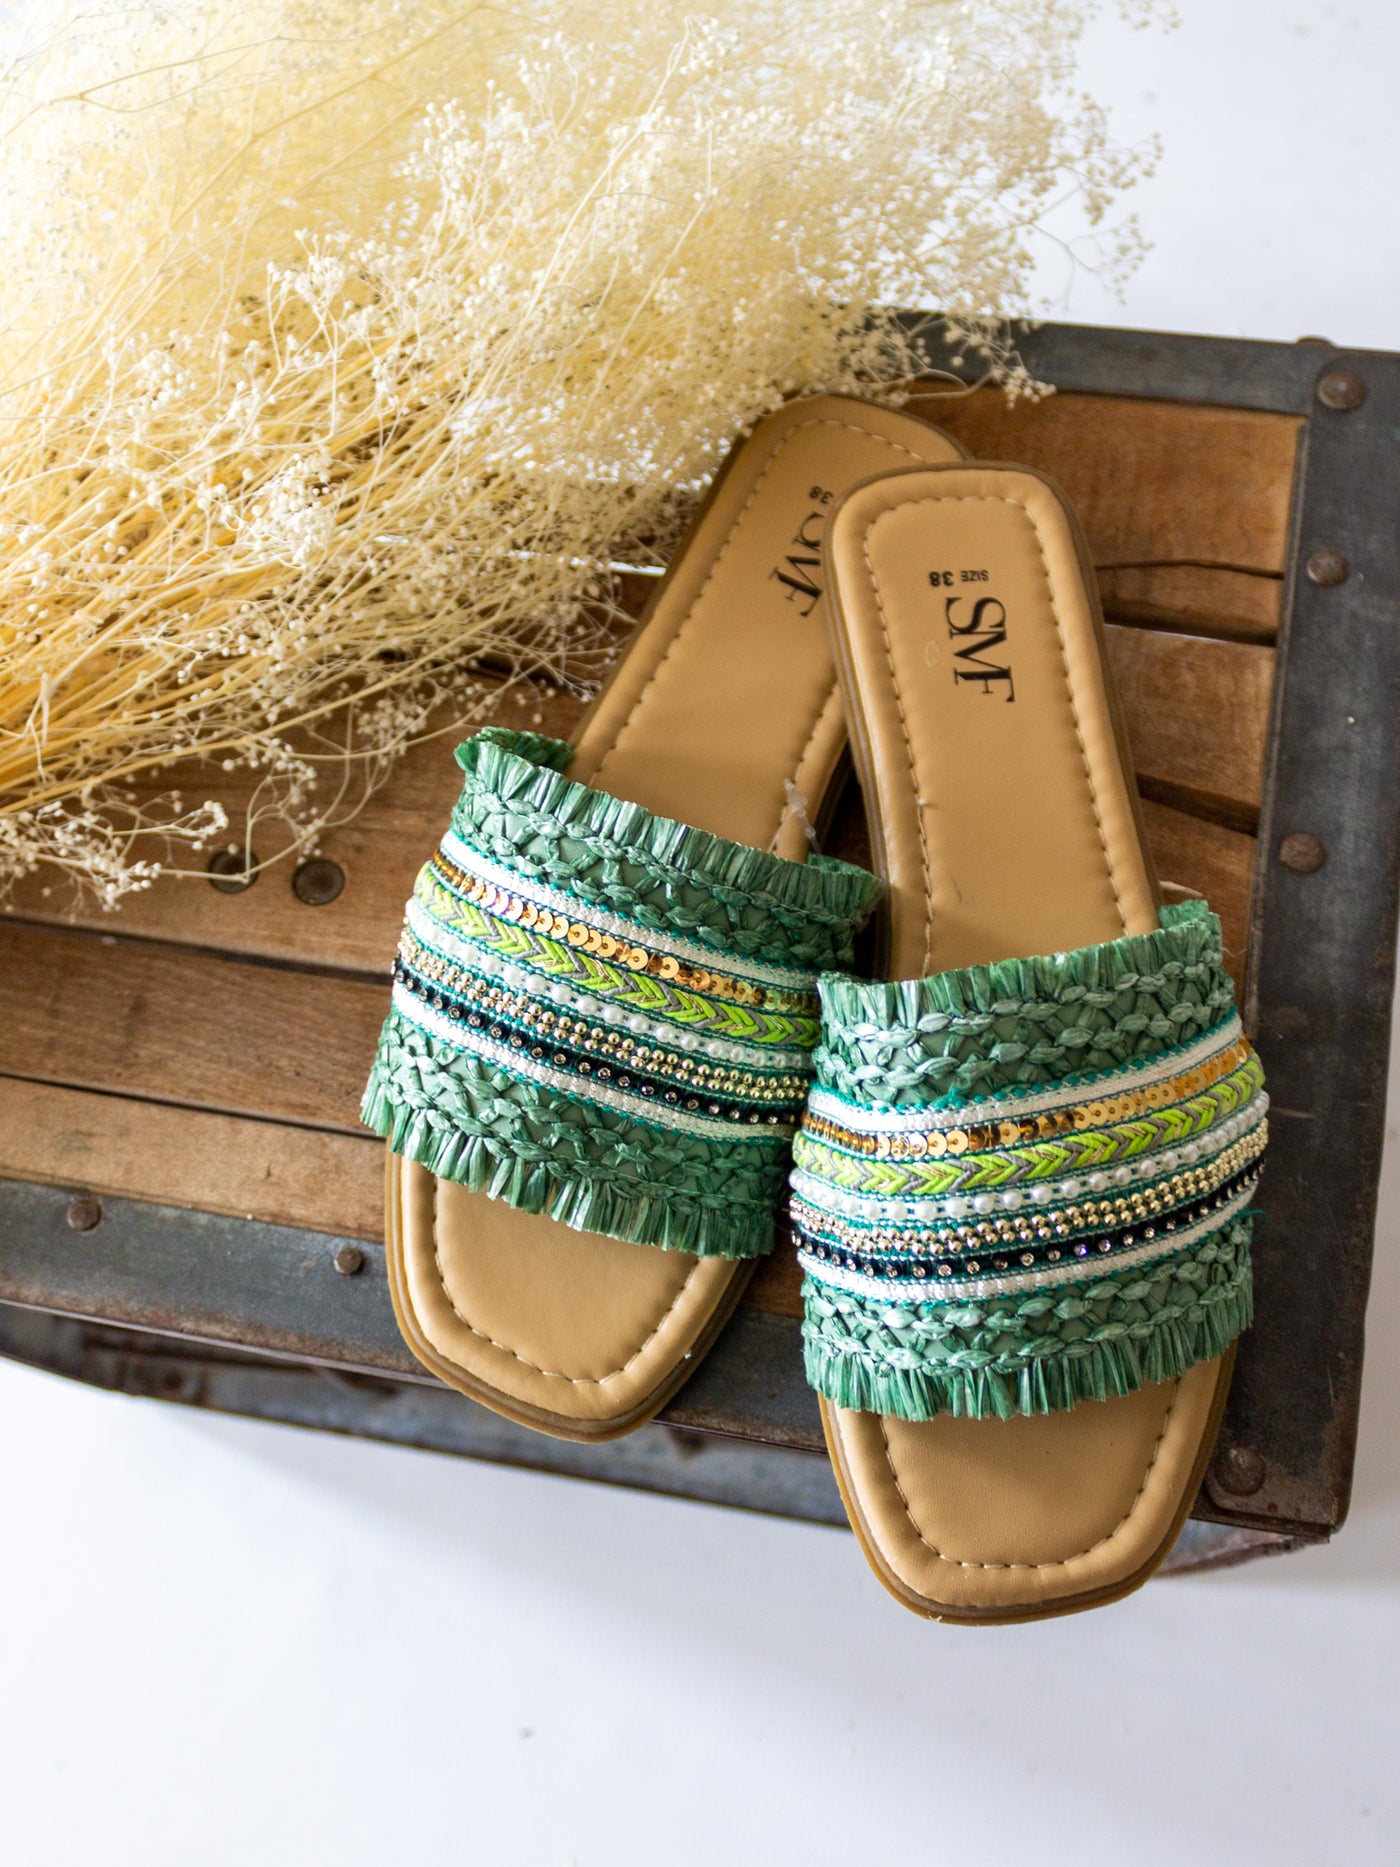 A boho themed sandal with braided, beads, sequins and other little accents on the top strap of the slide. They are shades of green, blue, gold, white, and black.